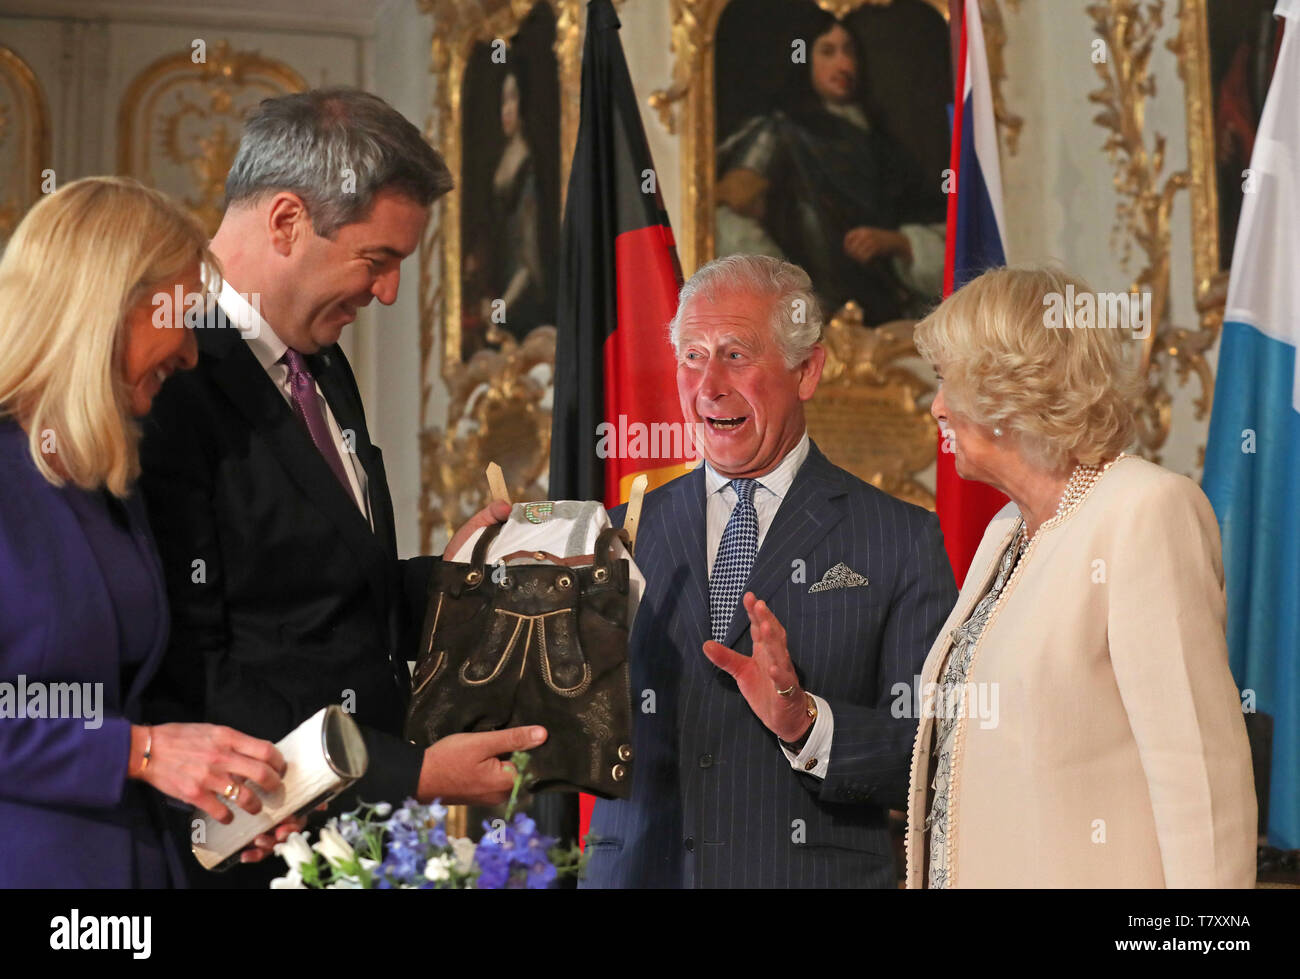 The Prince of Wales and the Duchess of Cornwall are given a pair of baby lederhosen as they are officially welcomed to Munich, Germany, in an event hosted by the Minister-President of Bavaria Markus Soder. Stock Photo